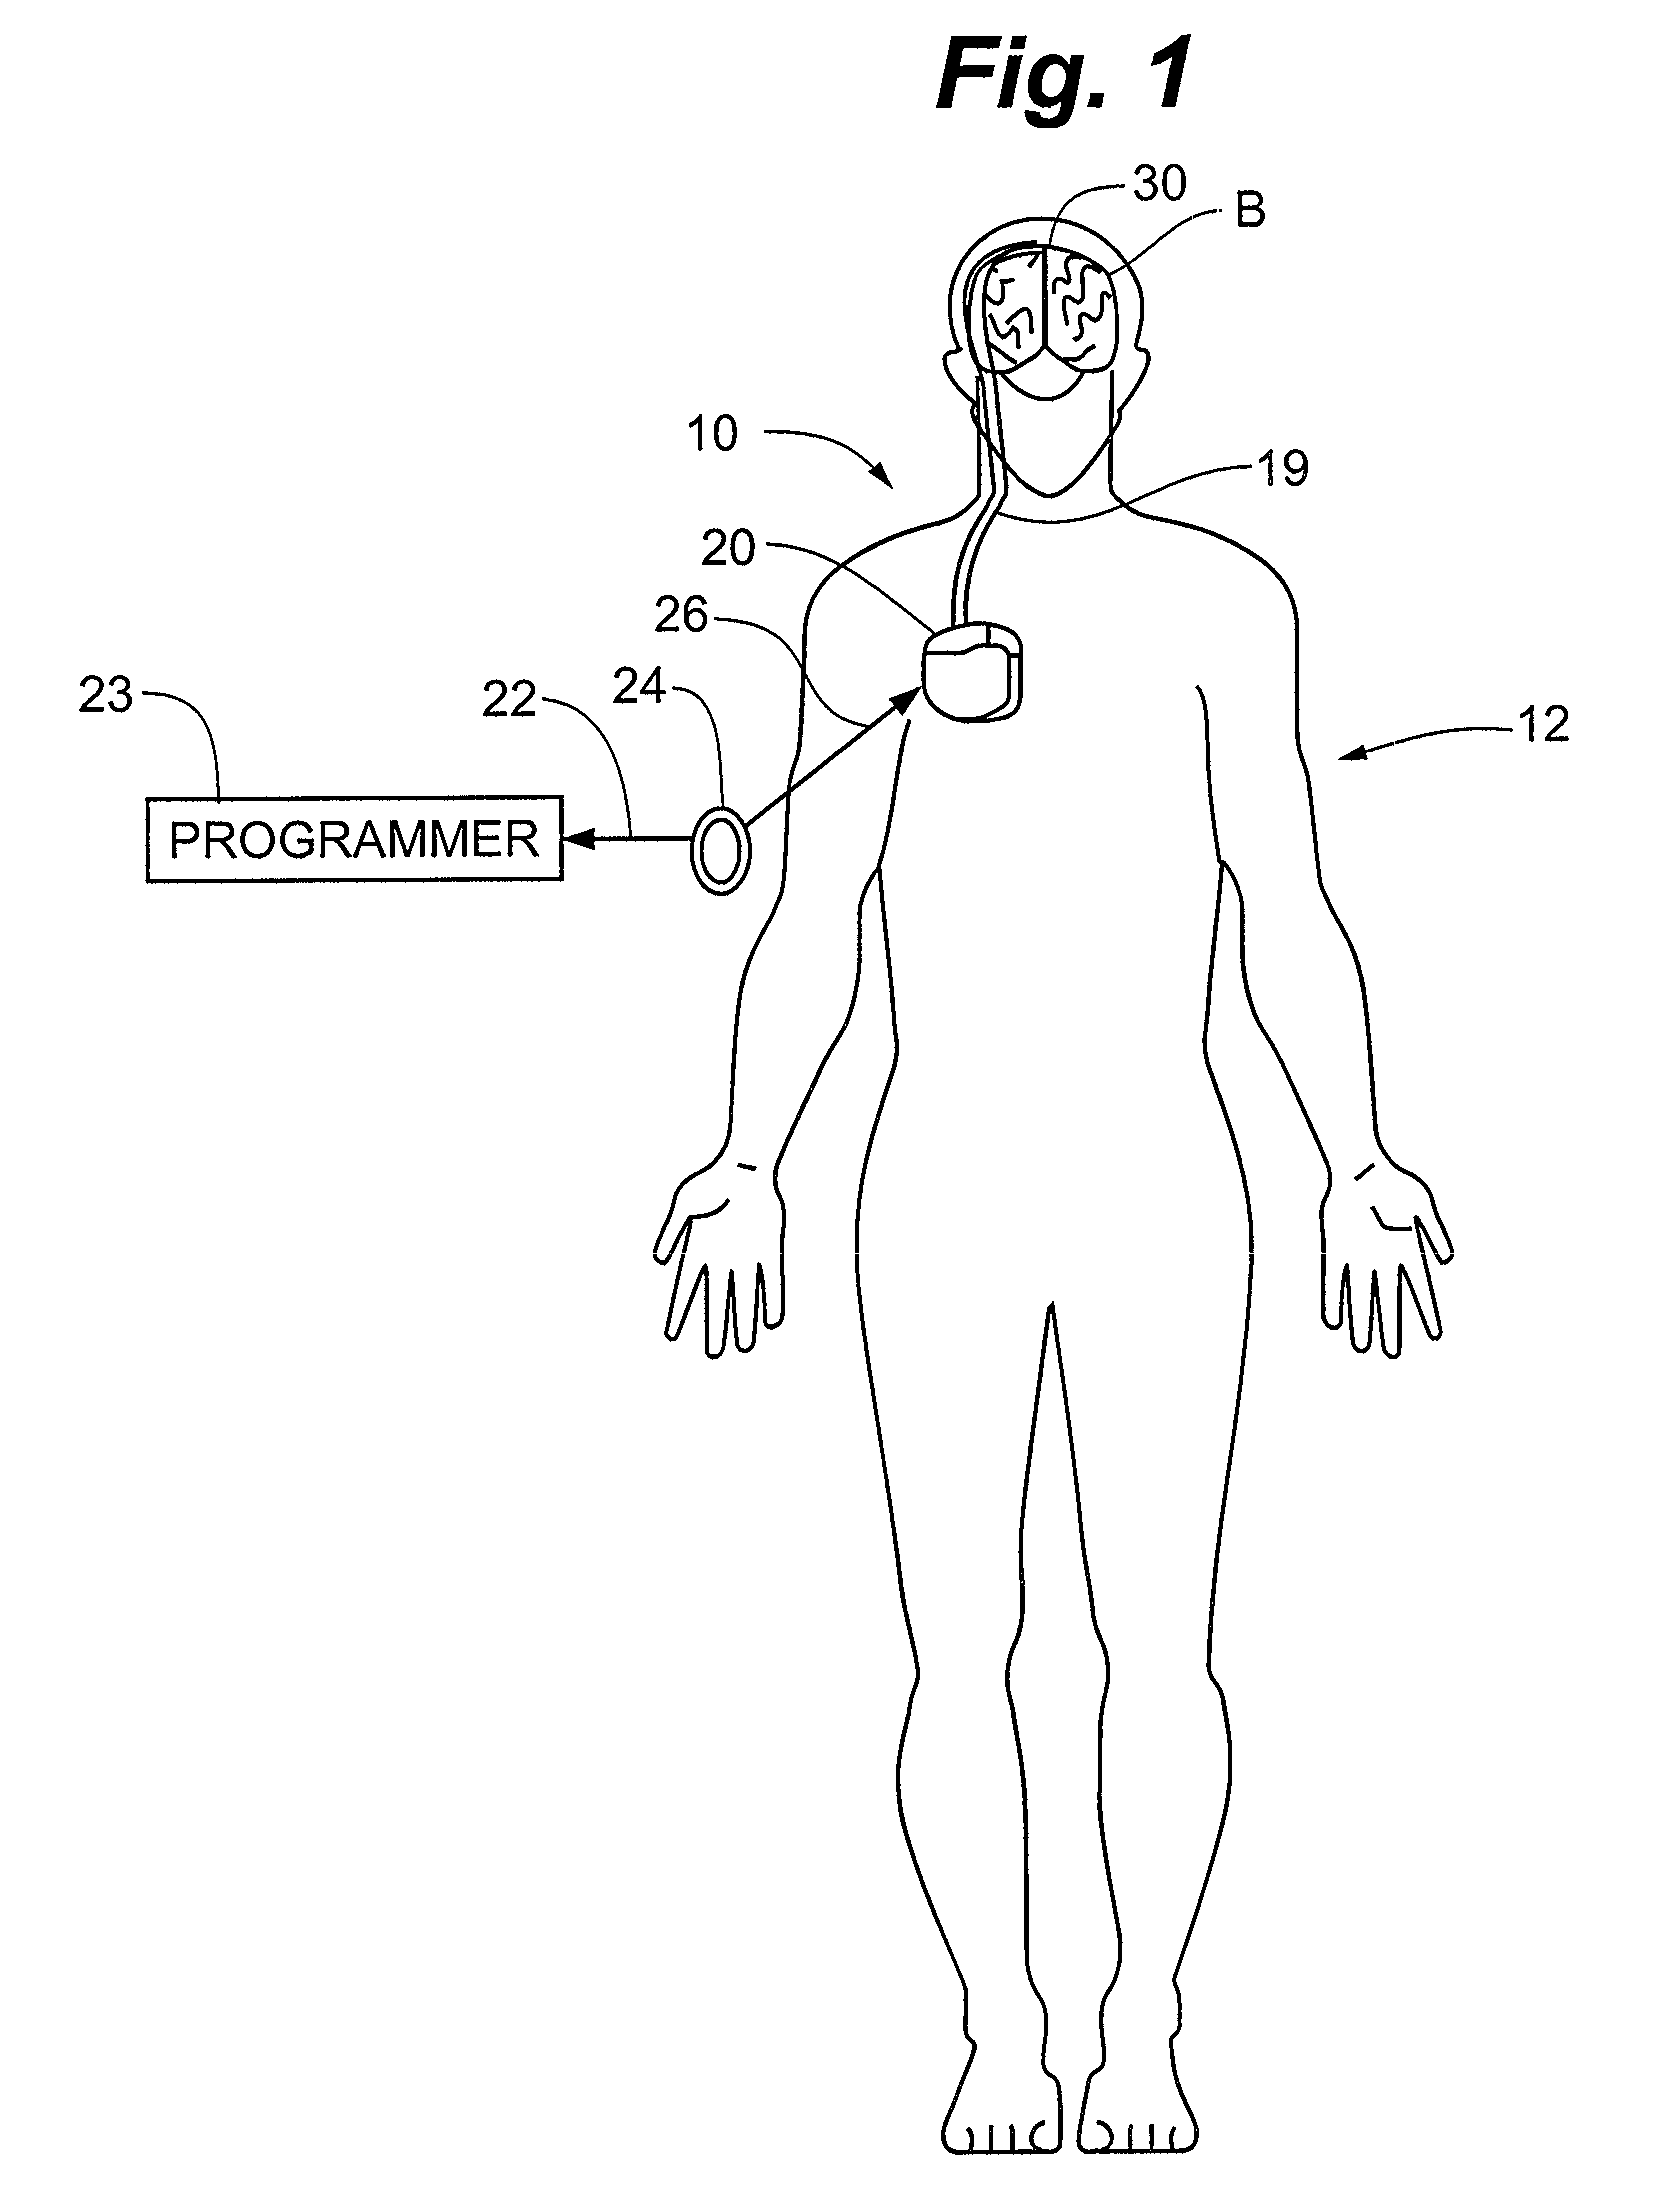 Method and apparatus for detection of nervous system disorders